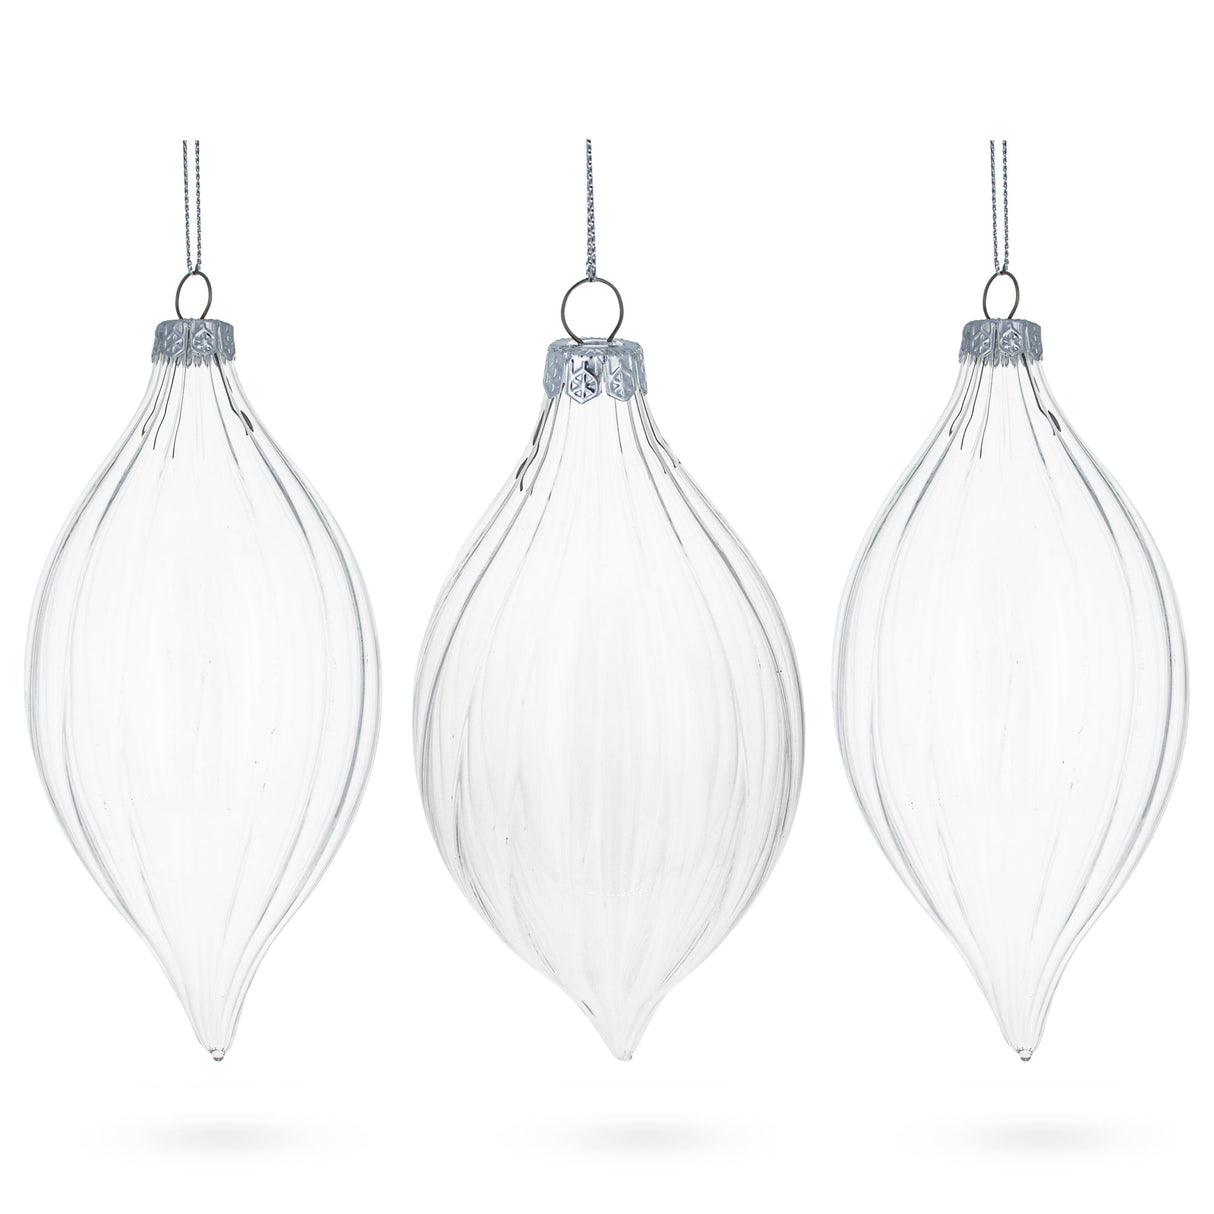 Set of 3 Striped Rhombus Finial Clear - Blown Glass Ornament 5.8 Inches in Clear color, Rhombus shape